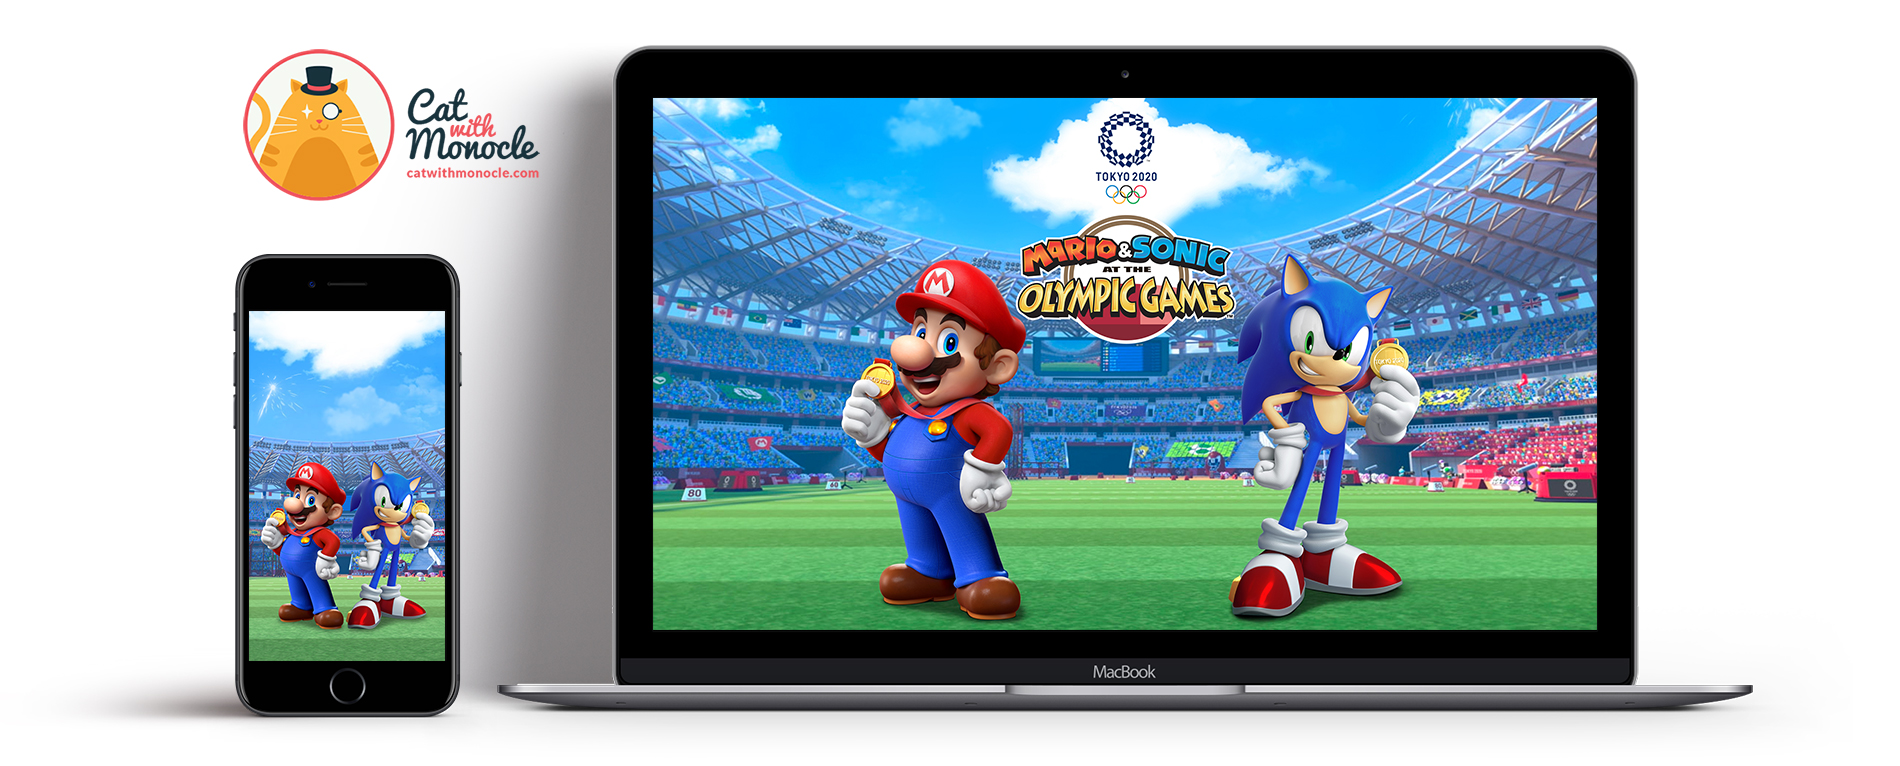 Mario & Sonic at the Olympic Games Wallpapers